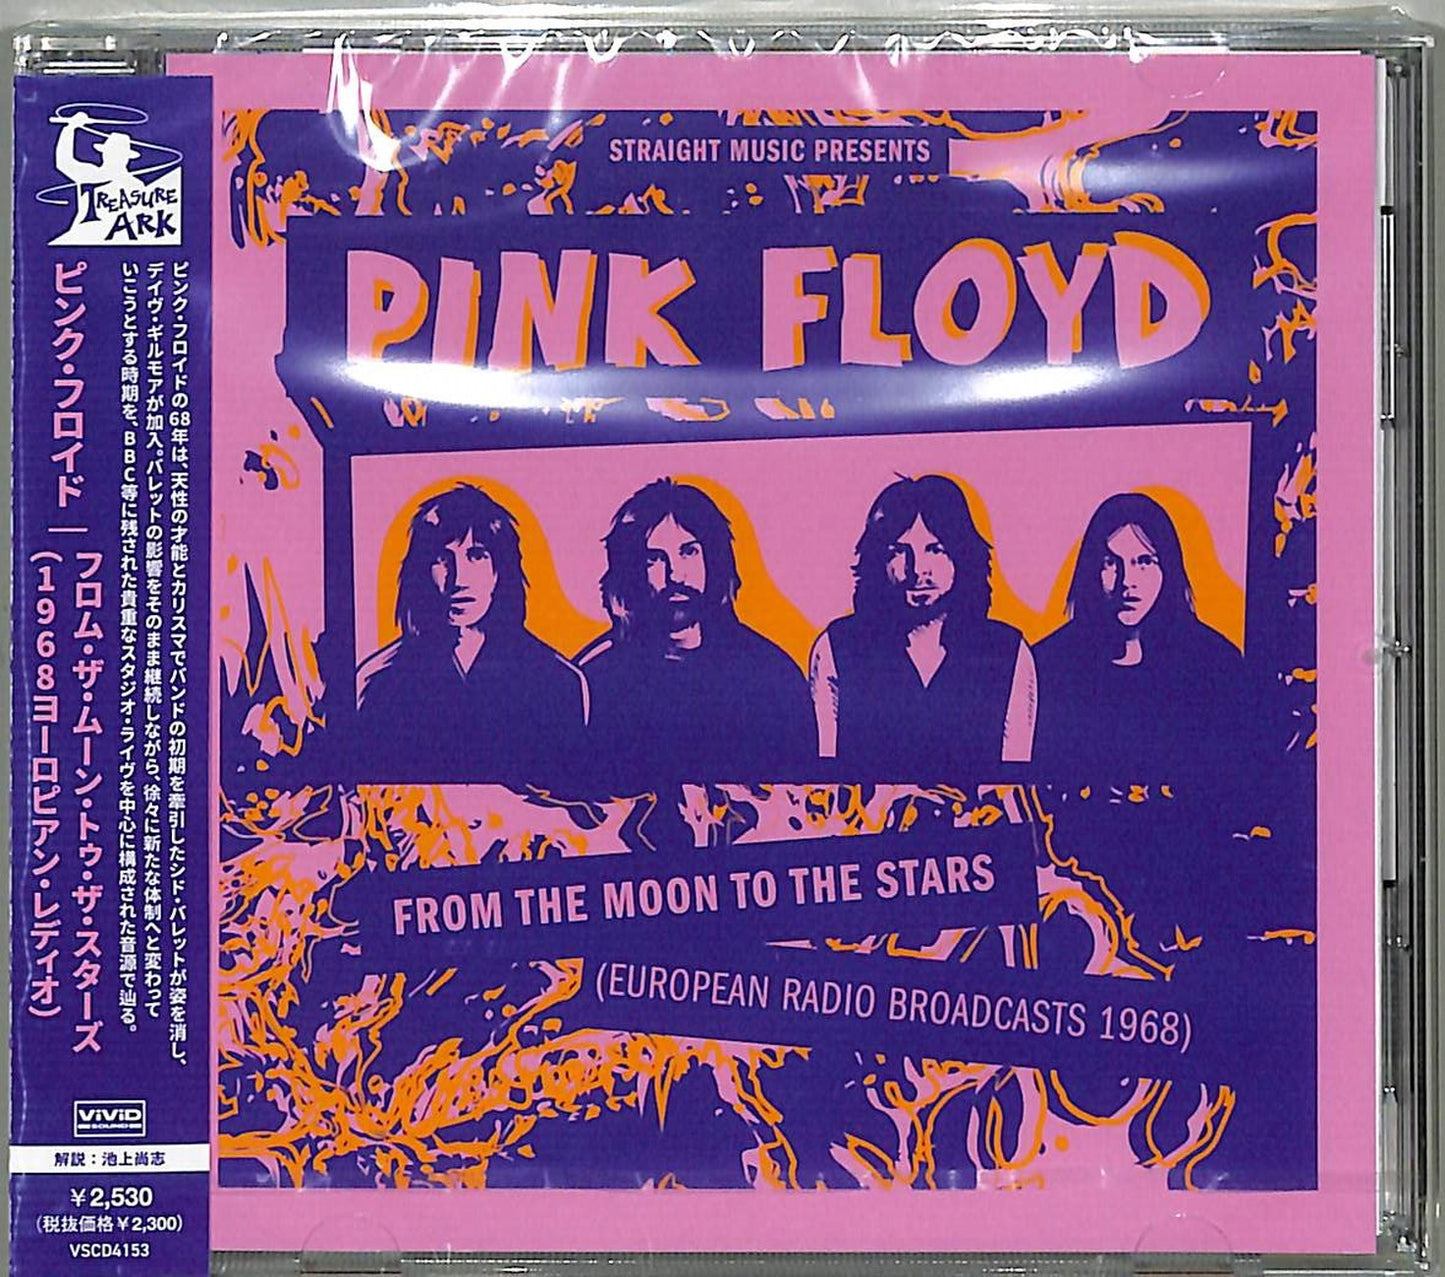 Pink Floyd - From The Moon To The Stars (European Radio Broadcasts 1968) - Import CD